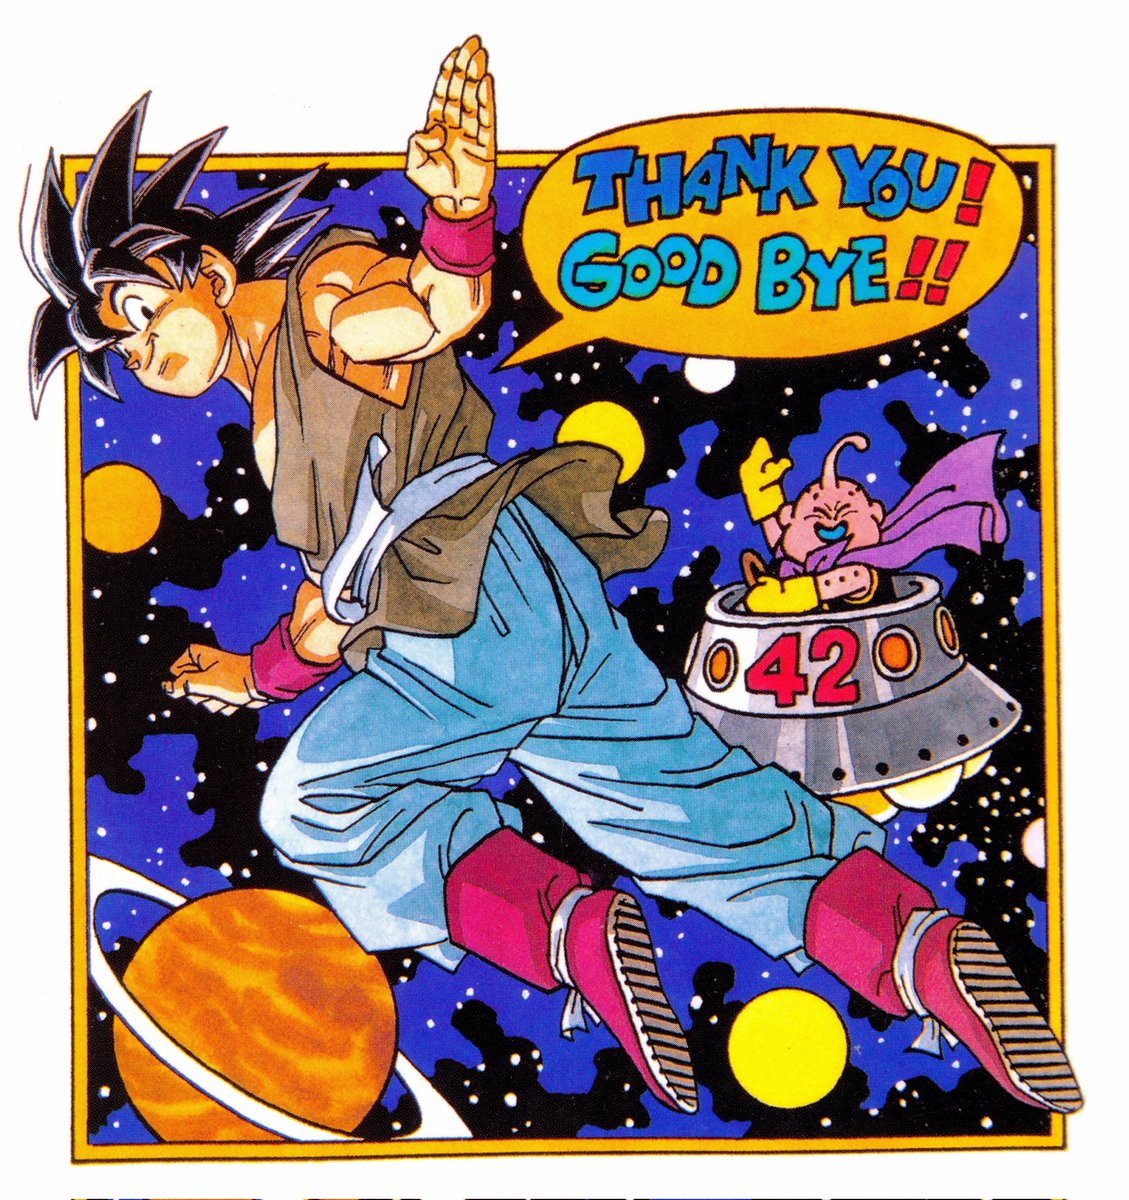 Rest in peace Akira Toriyama, one of the greatest visual storytellers of all time.